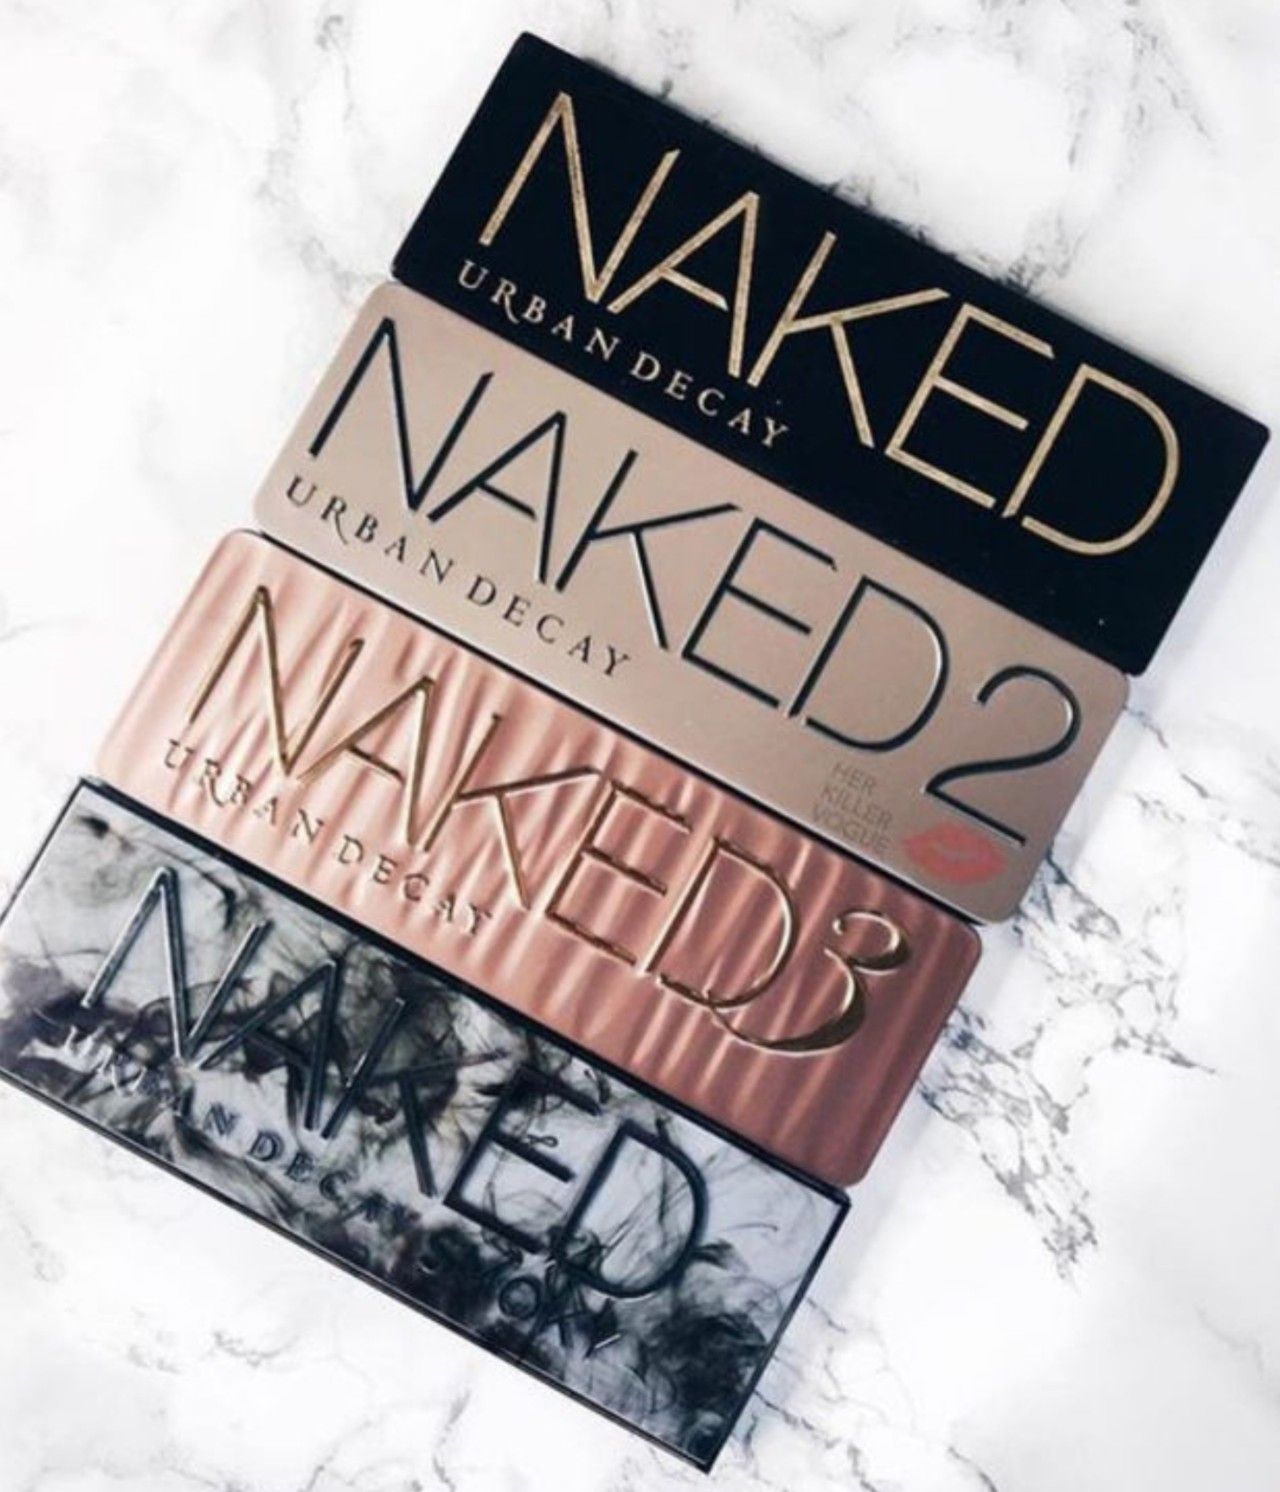 Urban Decay Naked Pallette